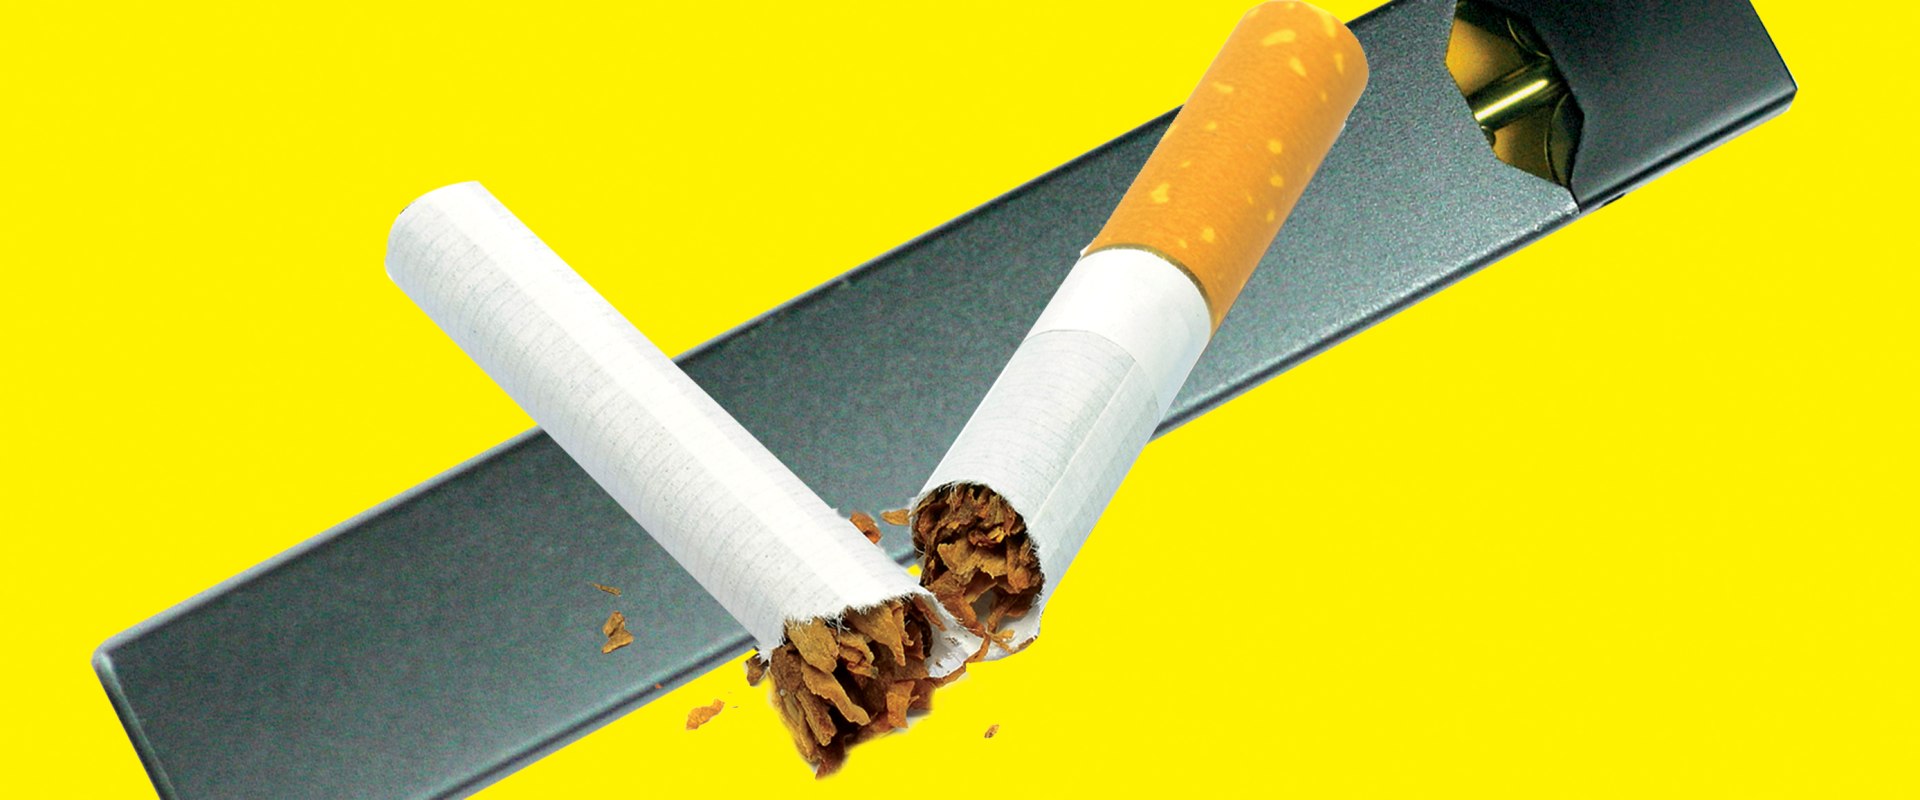 Why Can't You Advertise Tobacco? A Comprehensive Guide